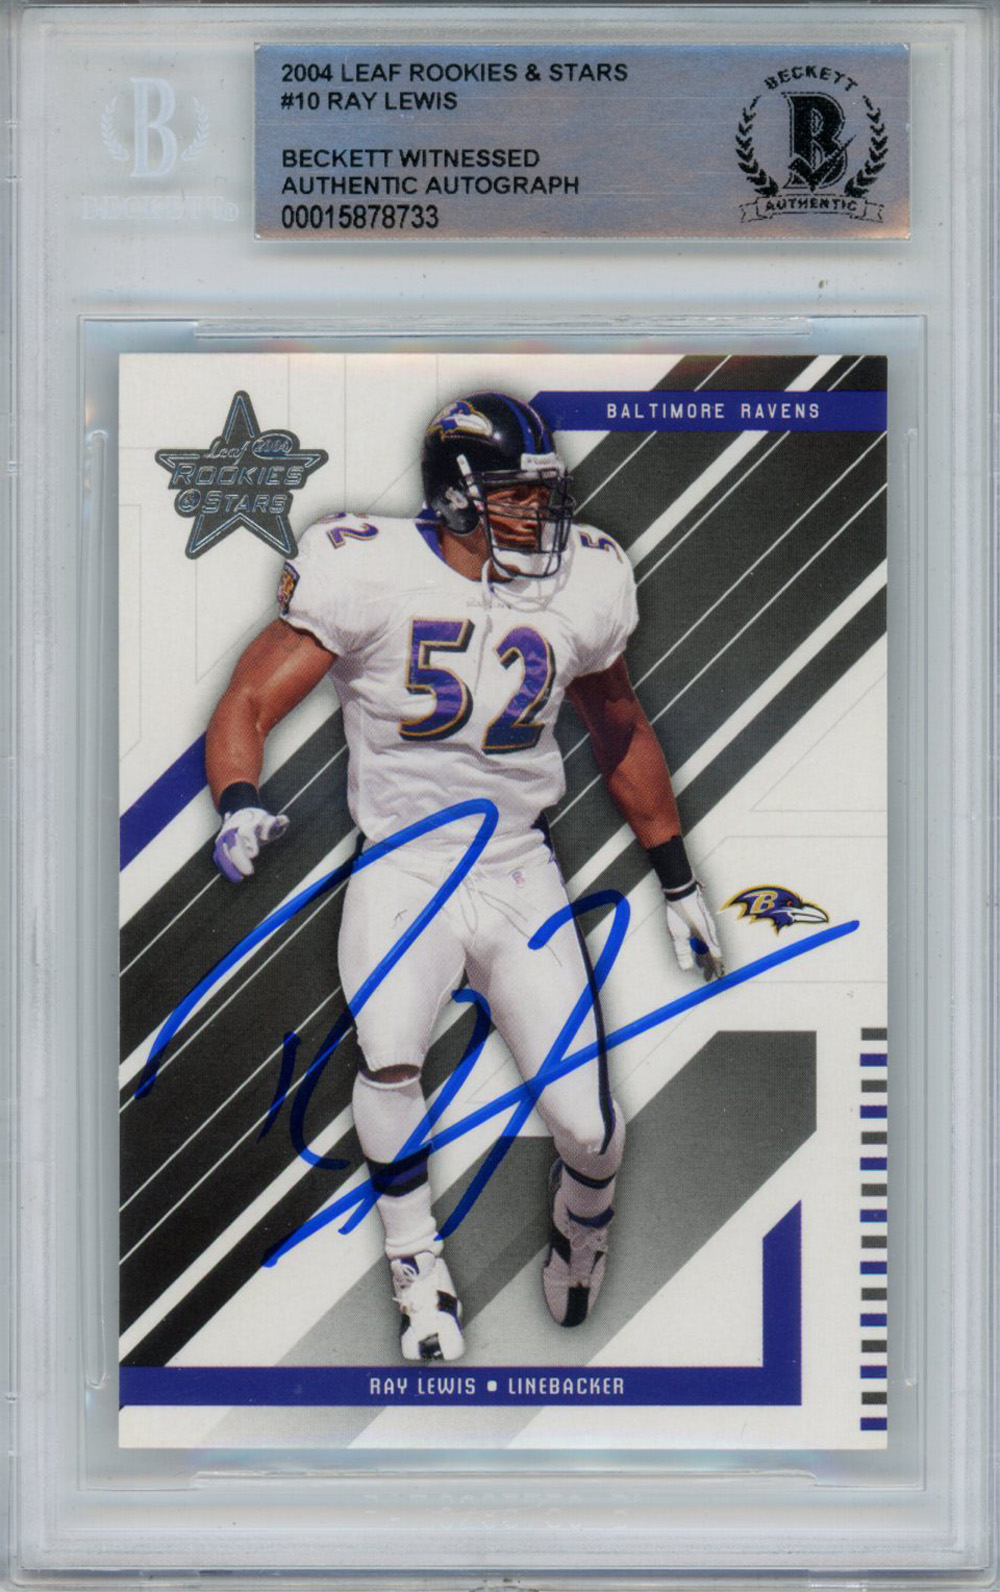 Ray Lewis Signed 2004 Leaf Rookies & Star #10 Trading Card Beckett Slab